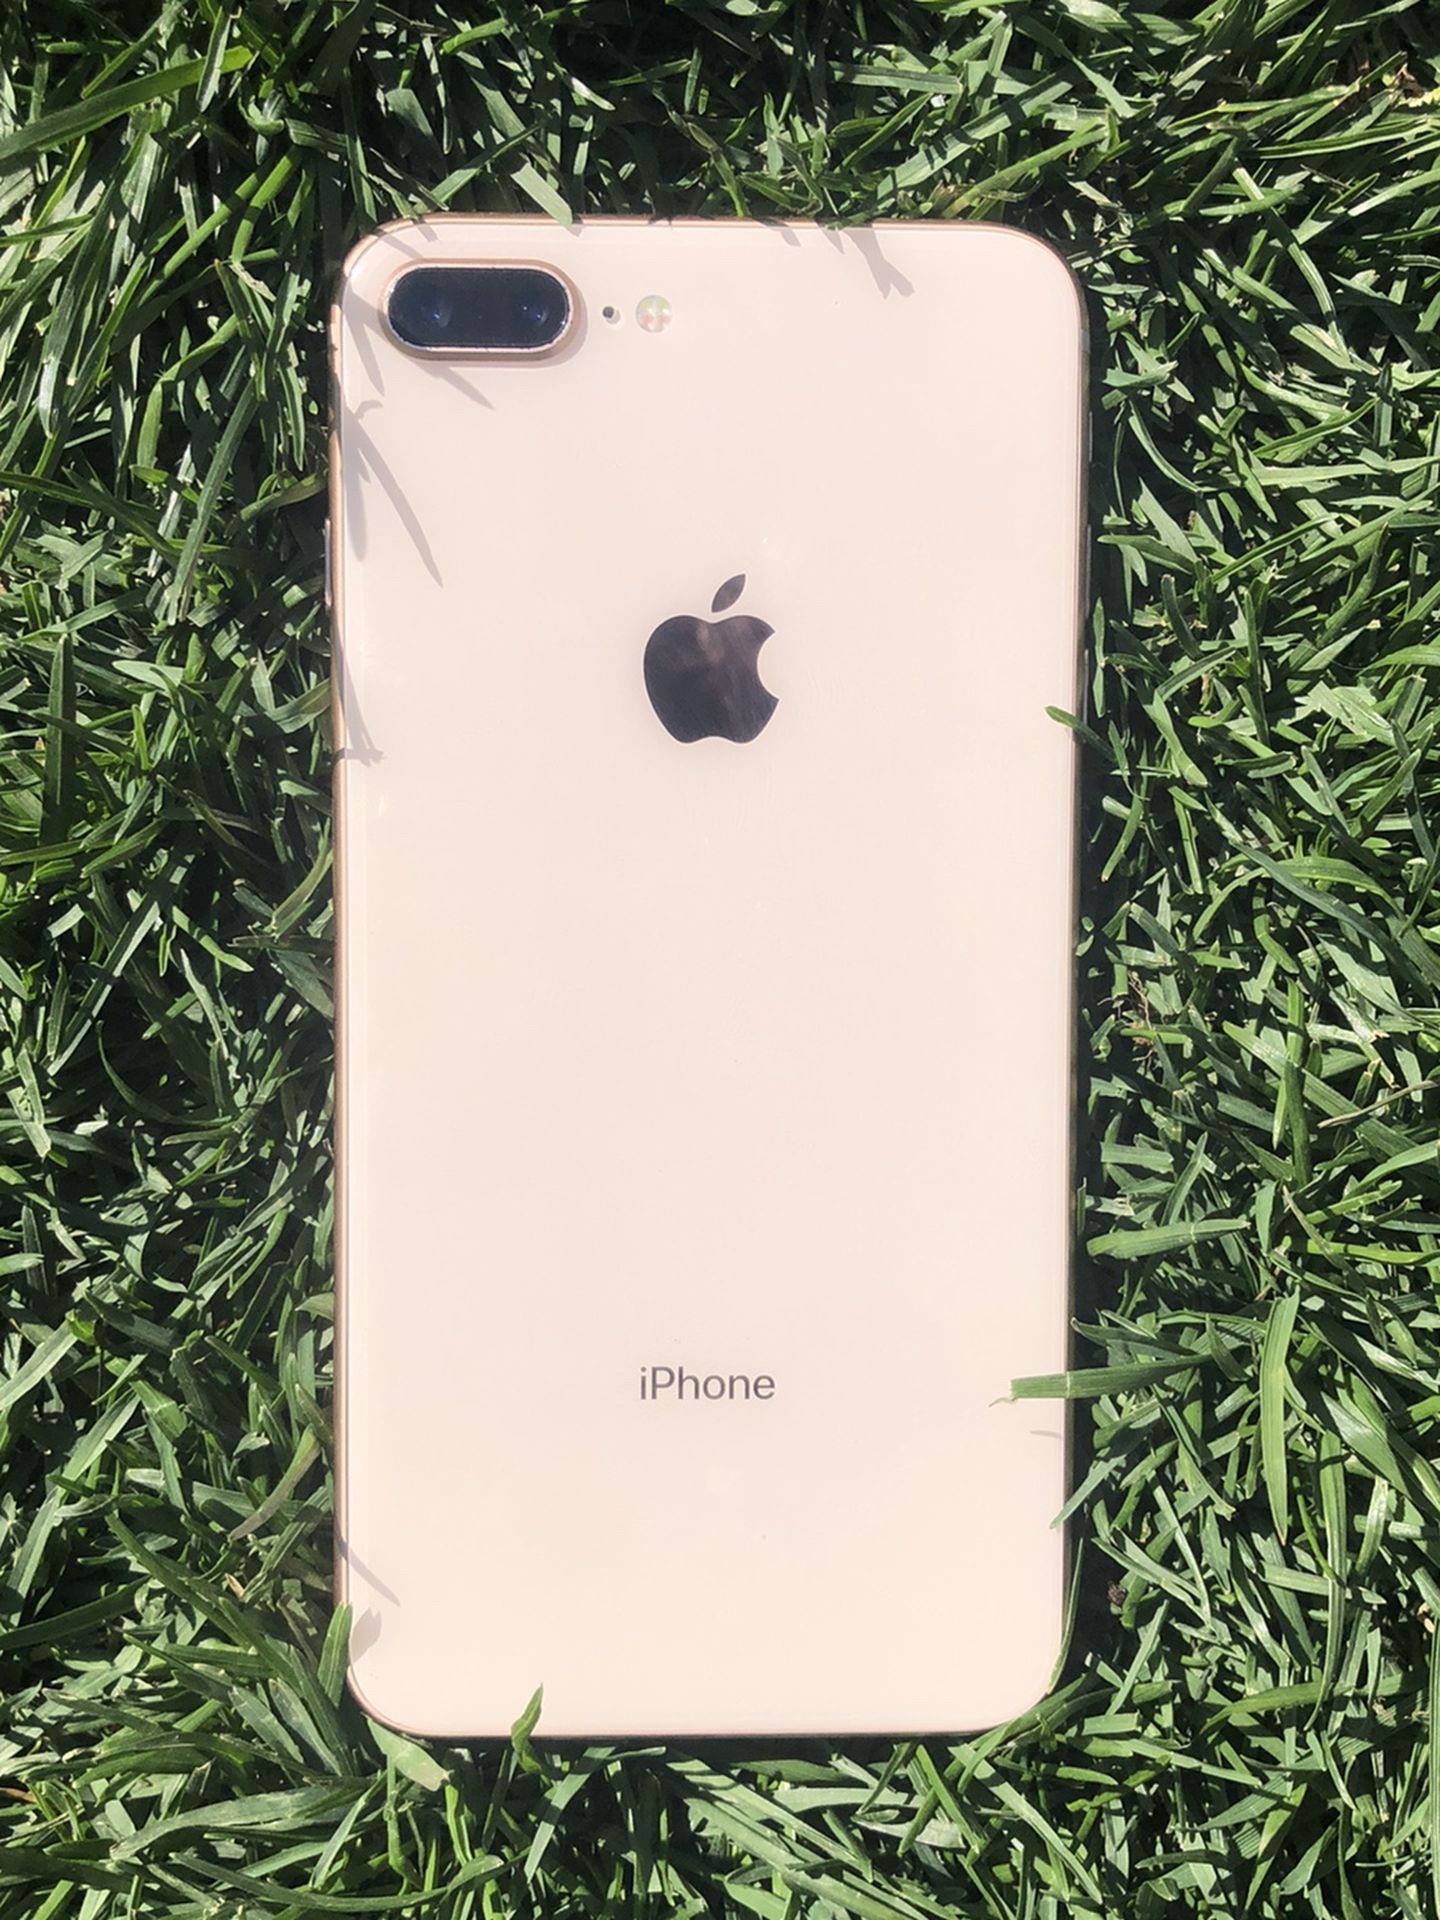 IPhone 8+ 256GB ATT CARRIER 📱✅ FREE DELIVERY OFFERED ⬇️